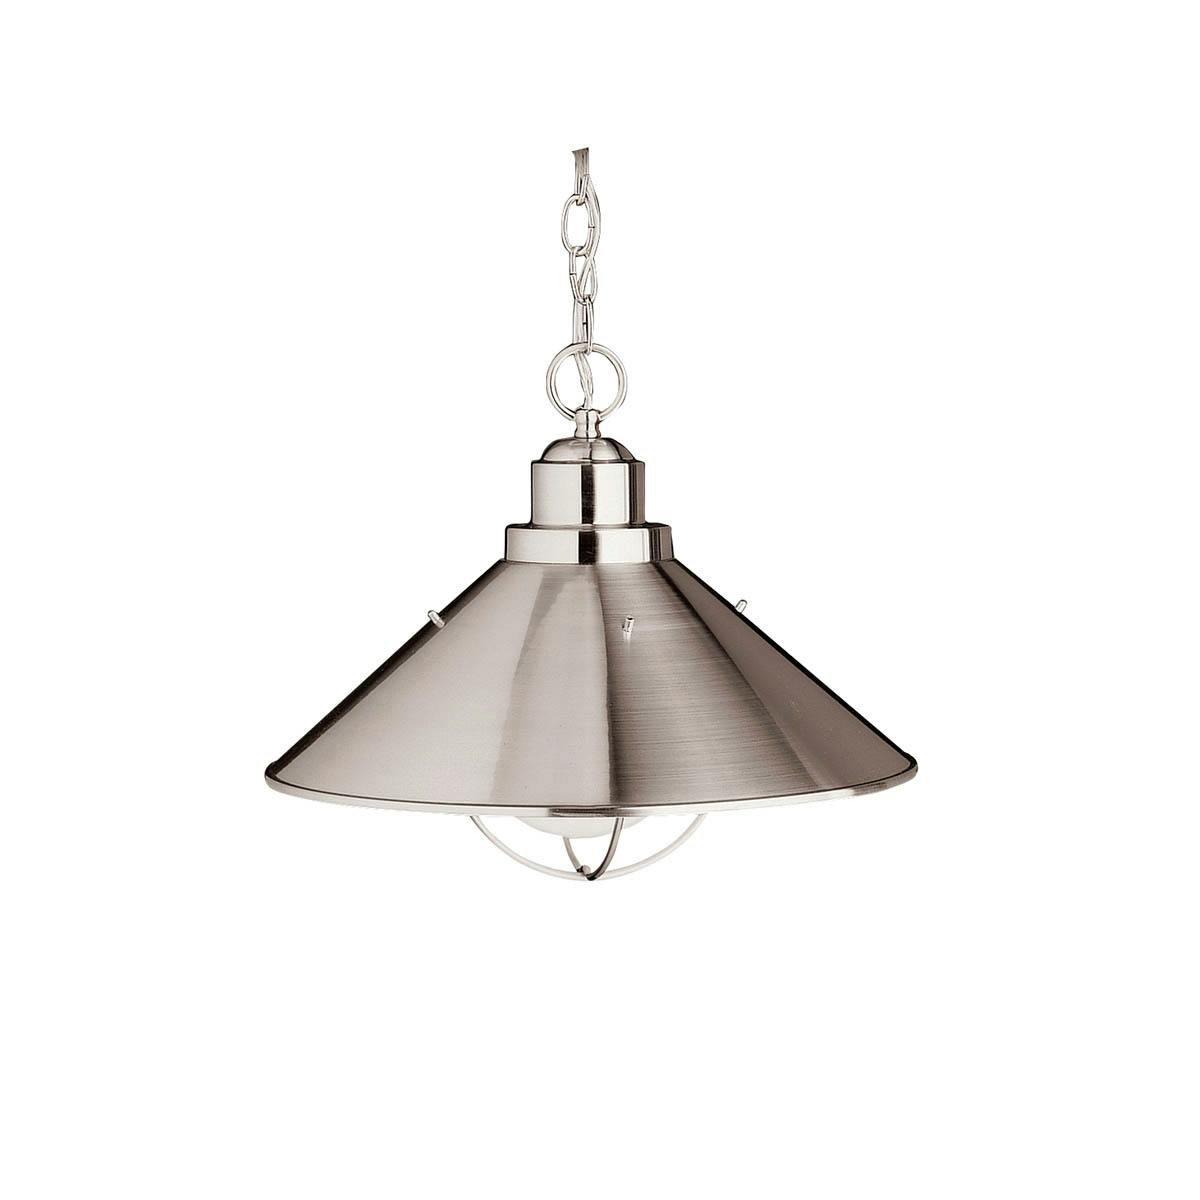 Close up view of the Seaside outdoor hanging light 2713NI